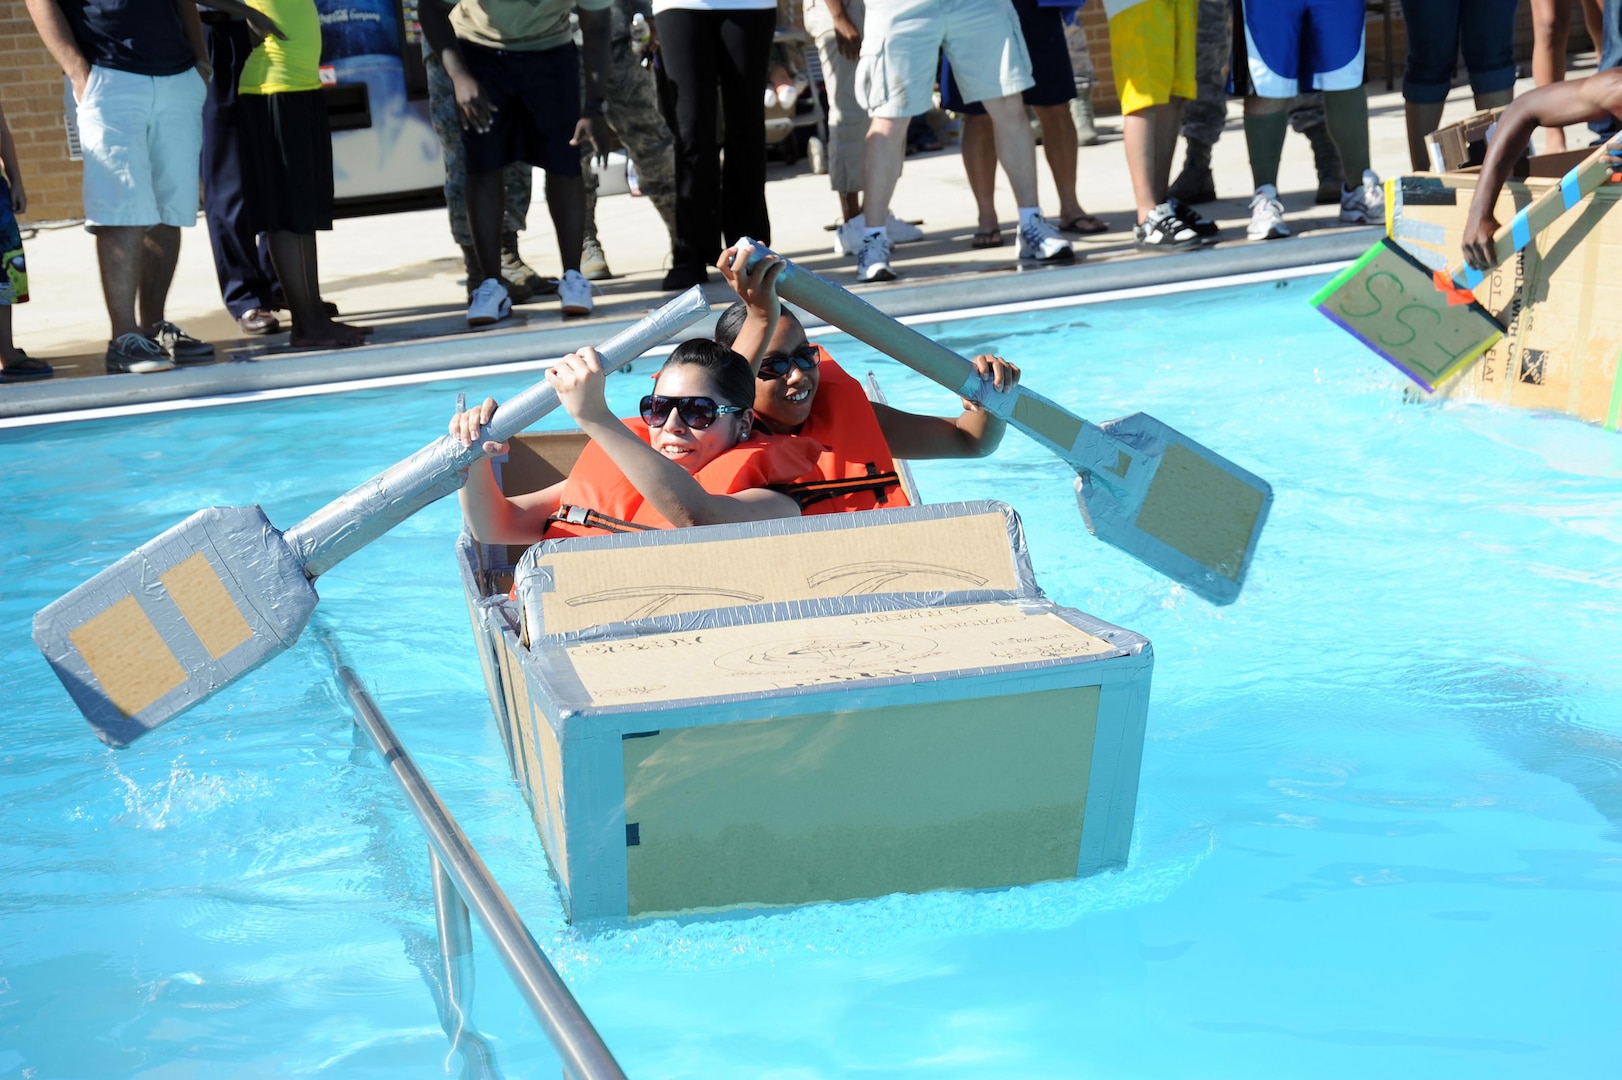 Senior Airman Tairesa Holland and Airman 1st Class Stephanie Martinez compete during the cardboard regatta race at the Warhawk Pool July 30. The race was part of the "Sizzling Summer Block Party" sponsored by the 802nd Force Support Squadron. The party included a disc jockey, children's activities, indoor sports activities, a dunking booth and an outdoor movie at dusk. Airman Holland is with the 802nd Logistics Readiness Squadron; Airman Martinez is with the 802nd FSS.  (U.S. Air Force photo/Alan Boedeker)